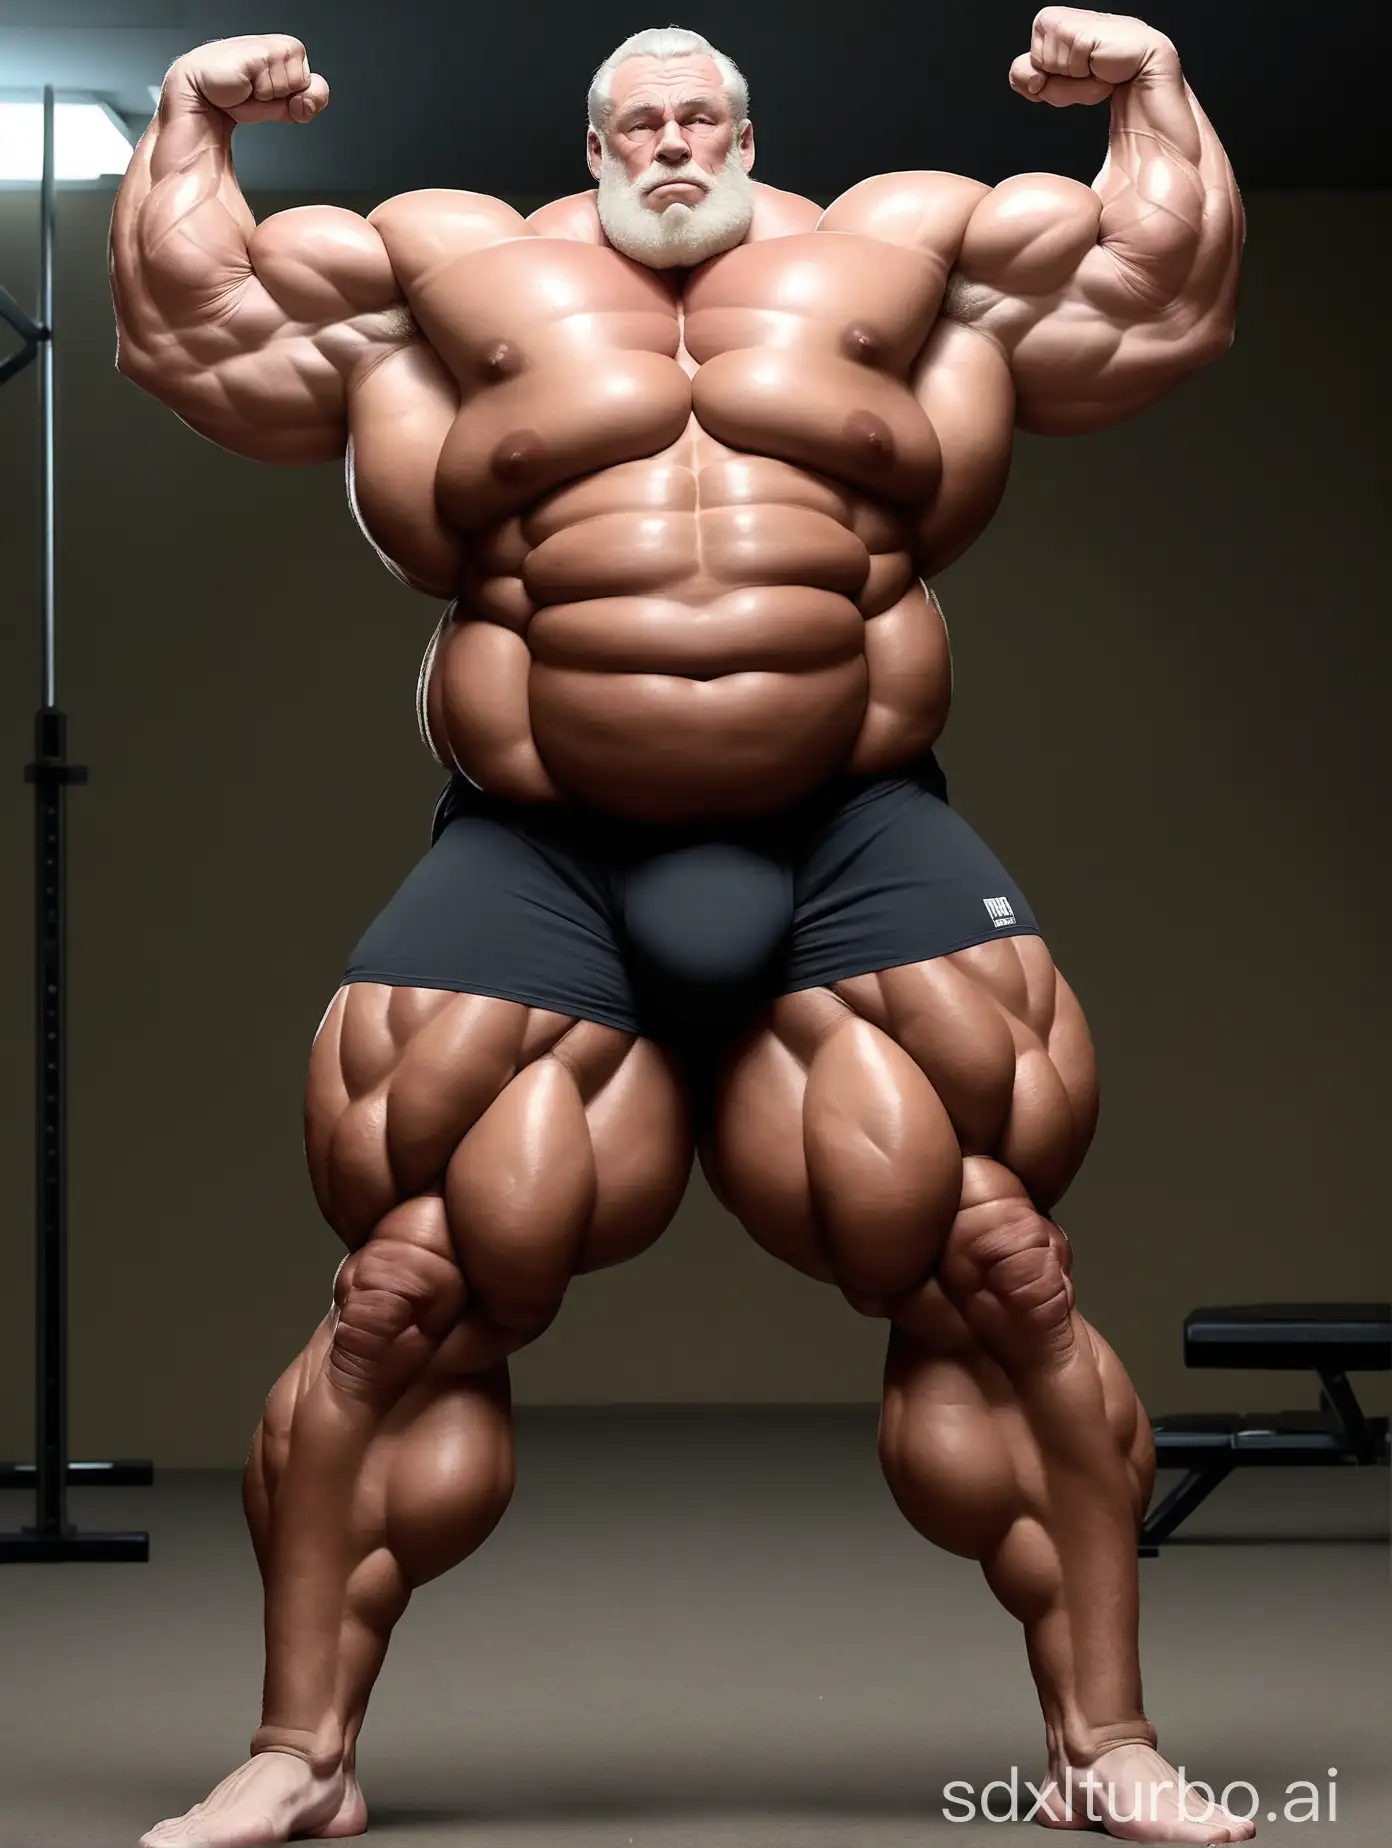 Massive-Muscle-Giant-Flexing-Biceps-Powerful-Bodybuilder-Displaying-Strength